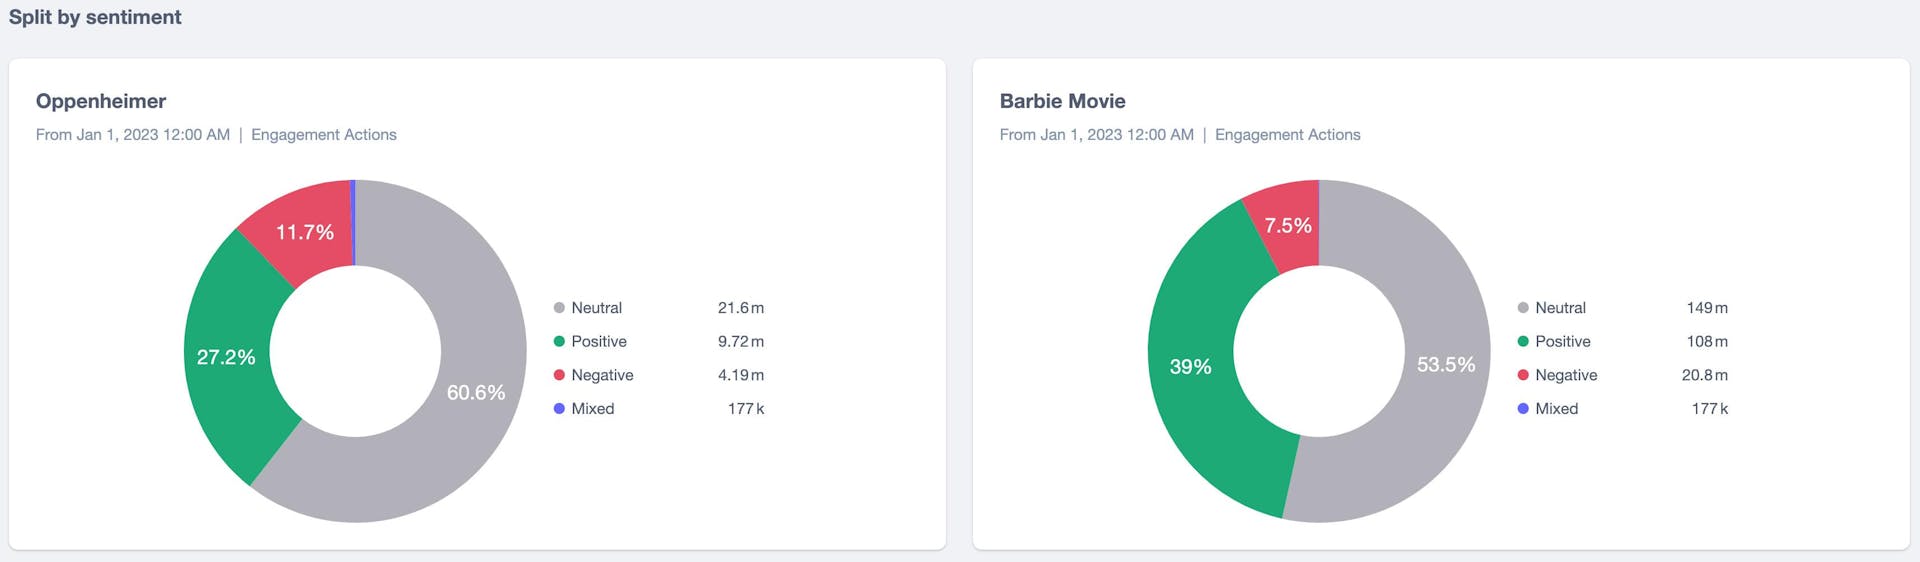 Ring graphs showing the sentiment of posts about Barbie and Oppenheimer.